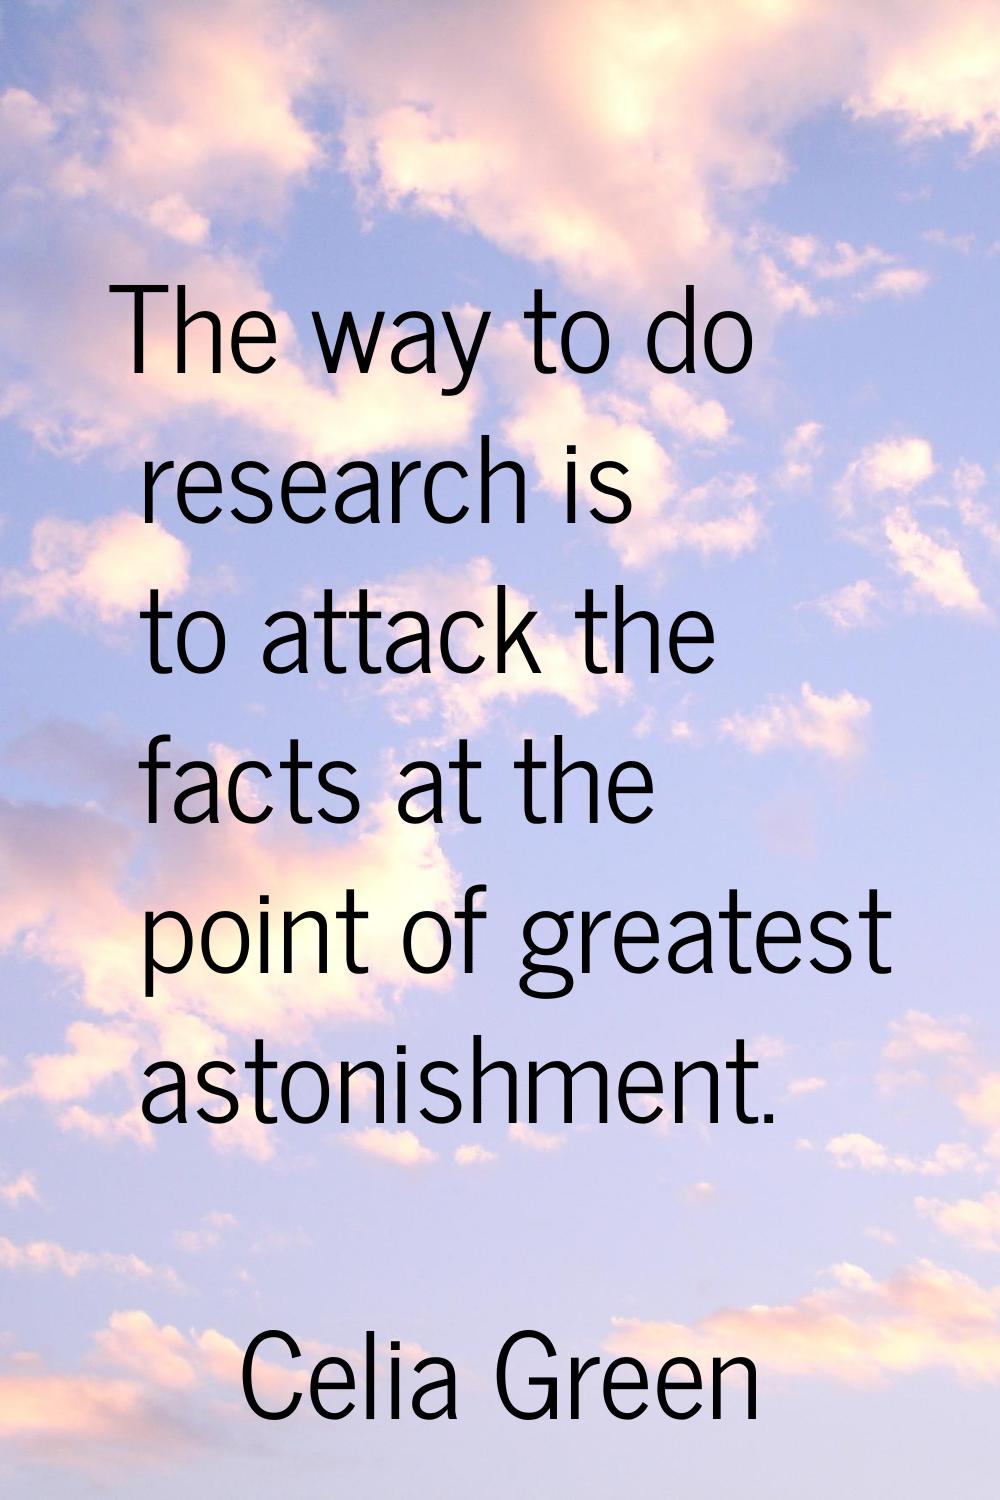 The way to do research is to attack the facts at the point of greatest astonishment.